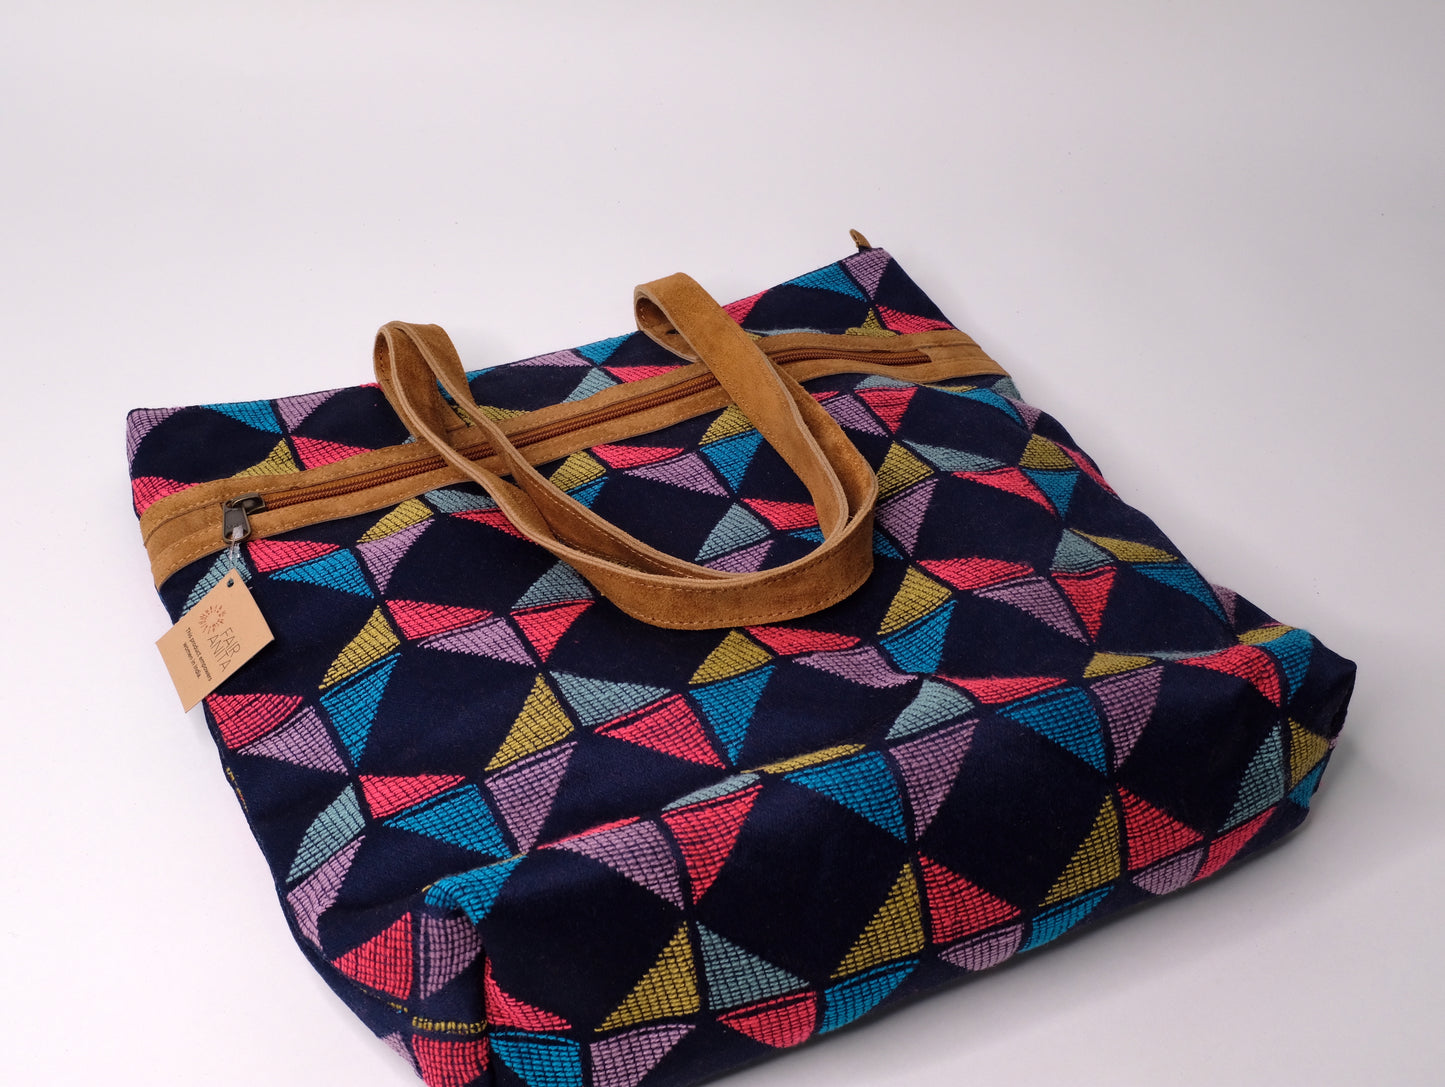 Tote bag crafted from recycled fabric and suede.Tote bag crafted from recycled fabric and suede.